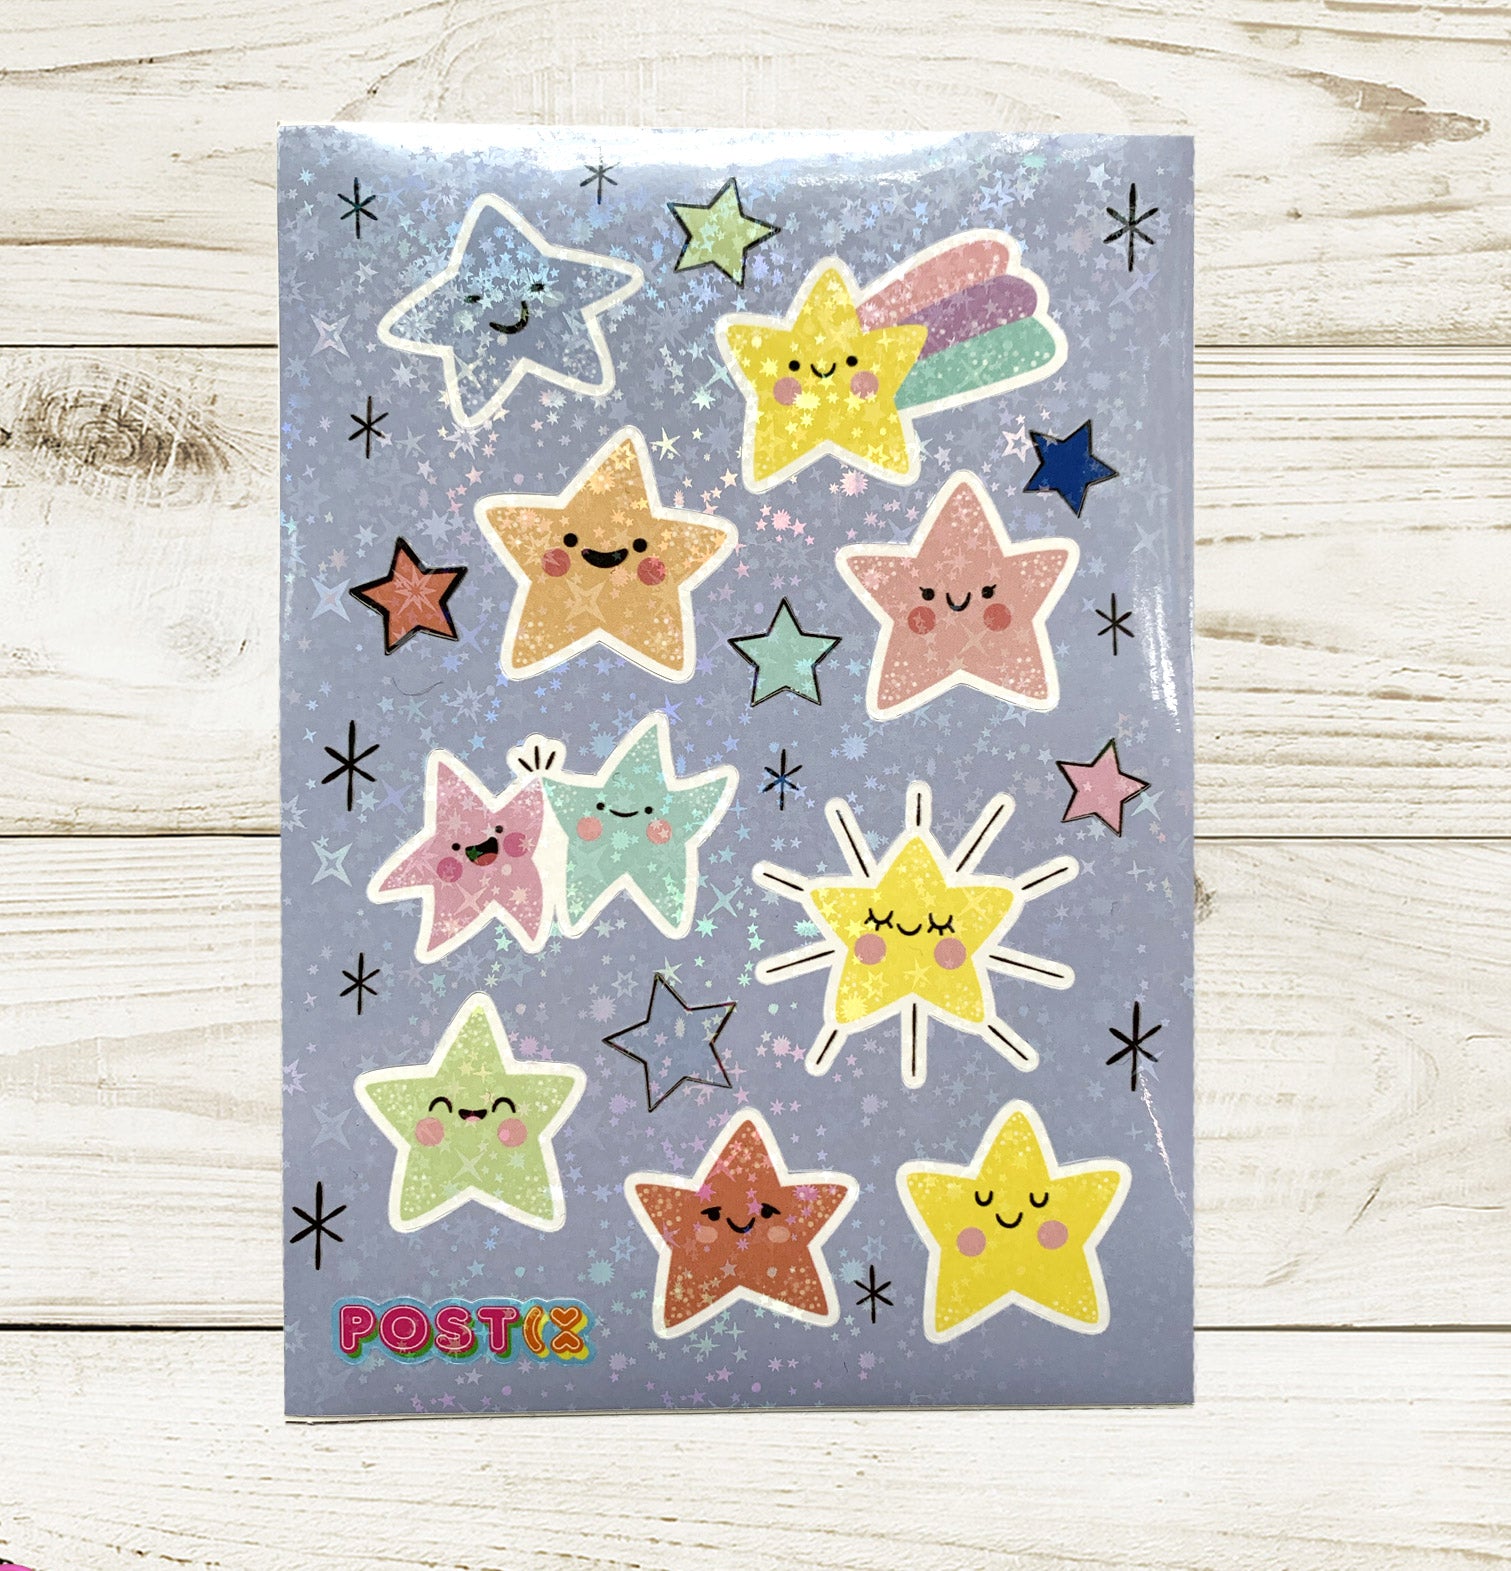 The Stars are Kind Hologram A6 Sticker Sheet